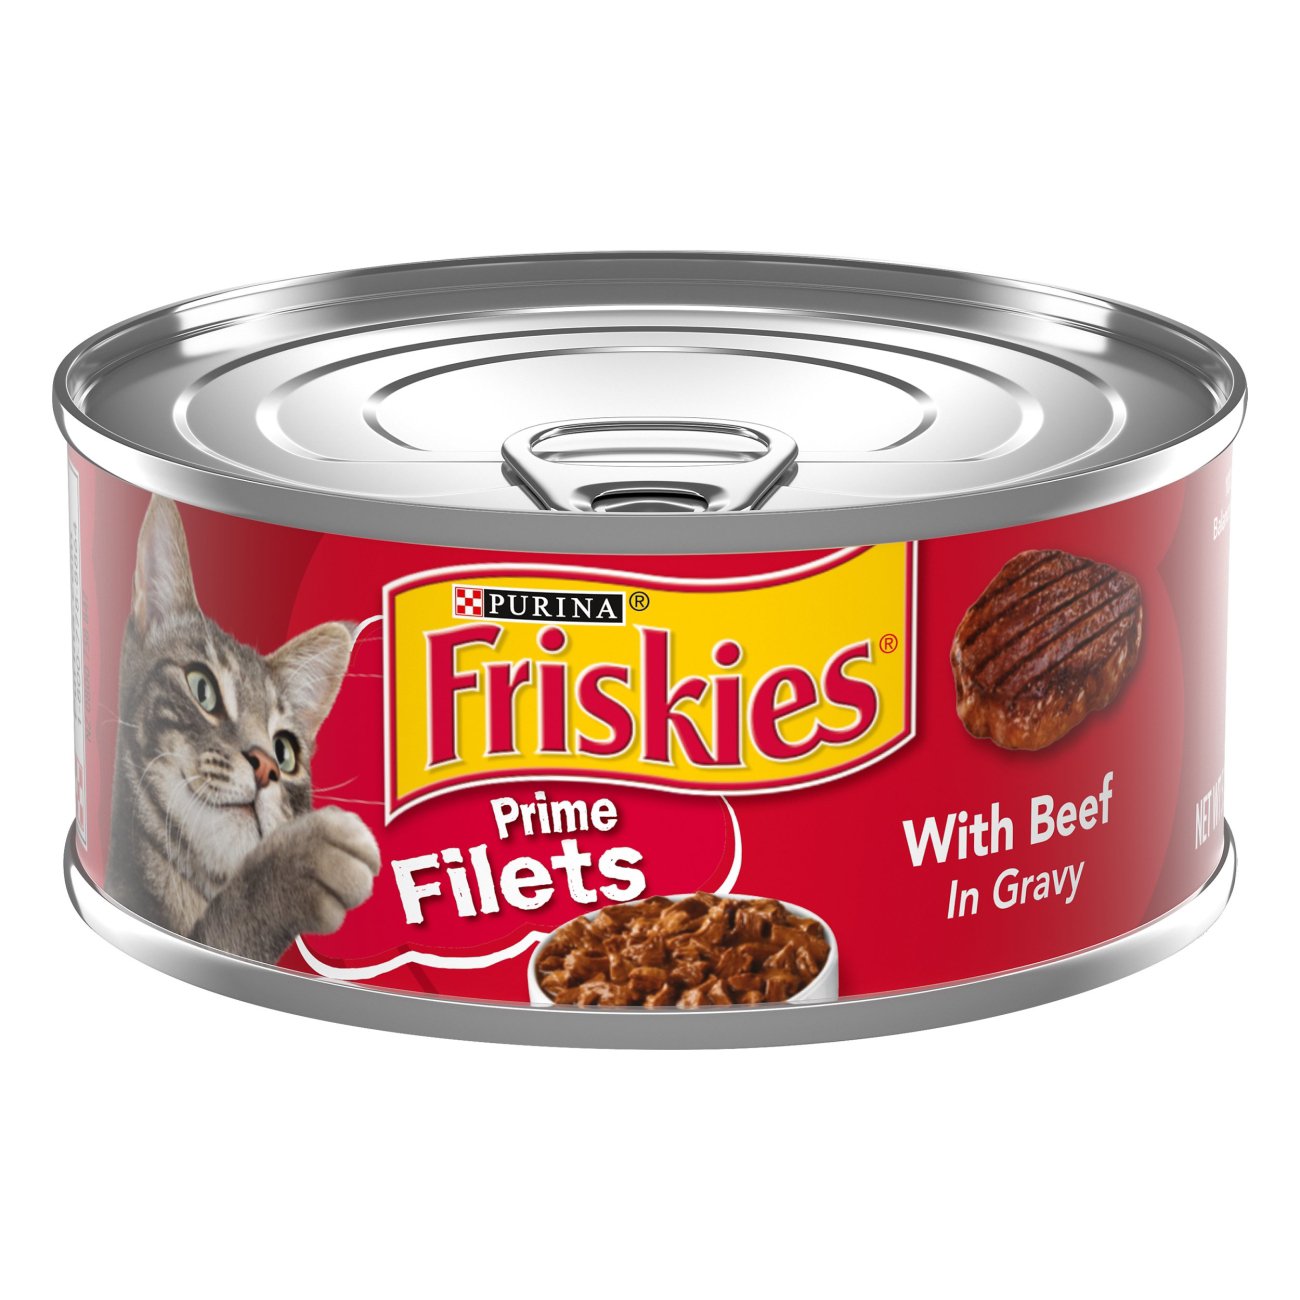 Purina Friskies Prime Filets with Beef in Gravy Wet Cat Food Shop